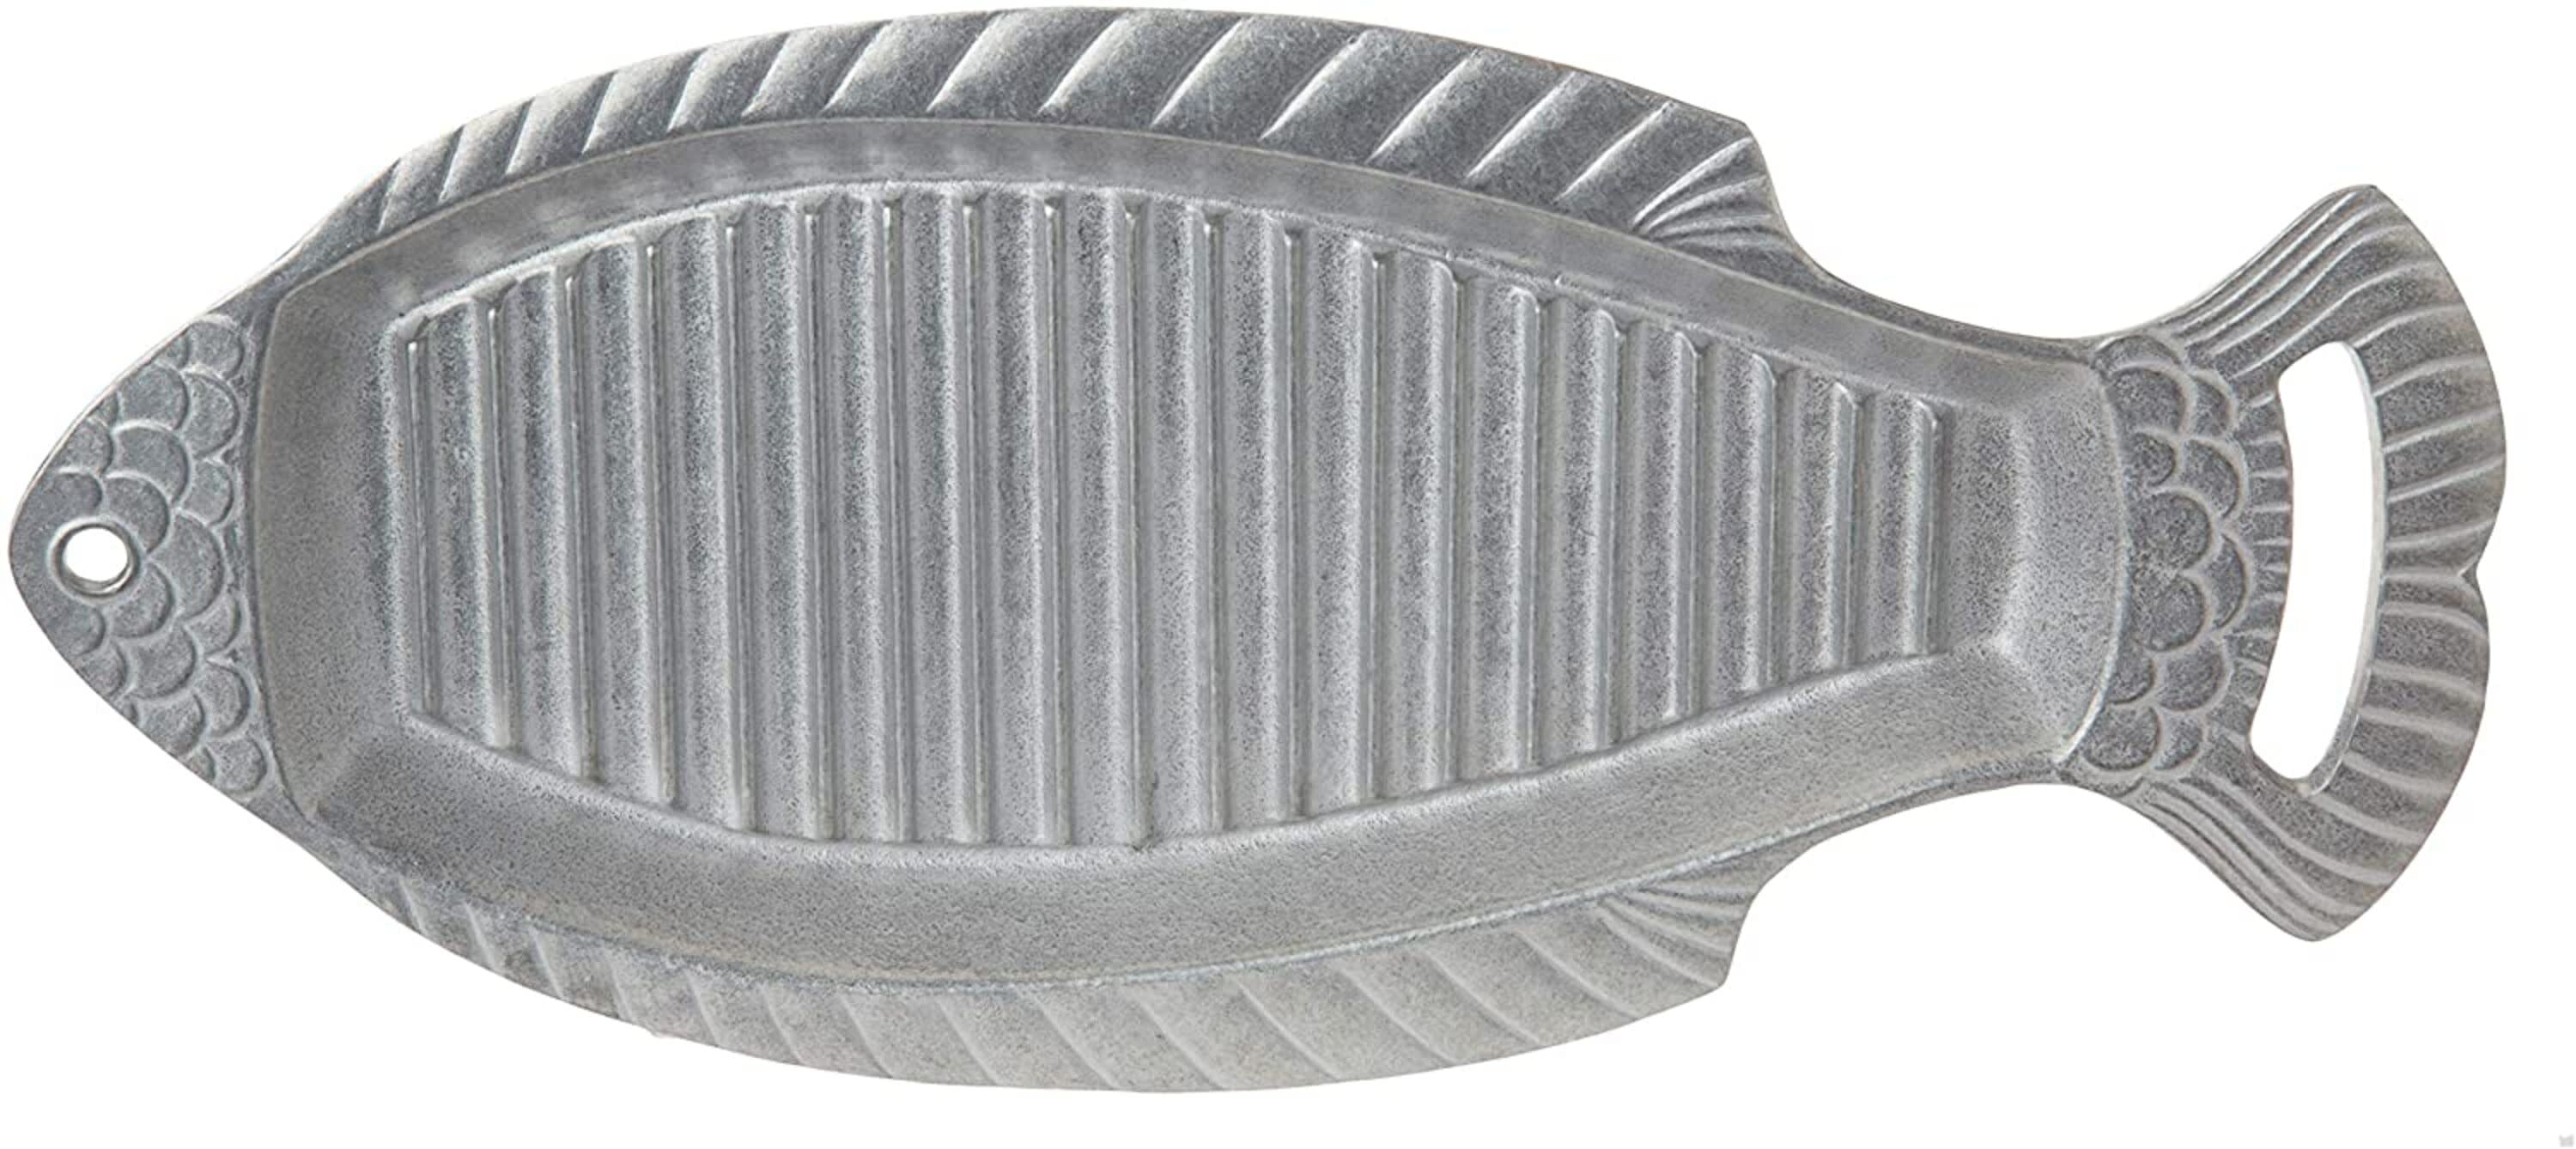 Gourmet Grillware Seafood Oyster Grill Tray